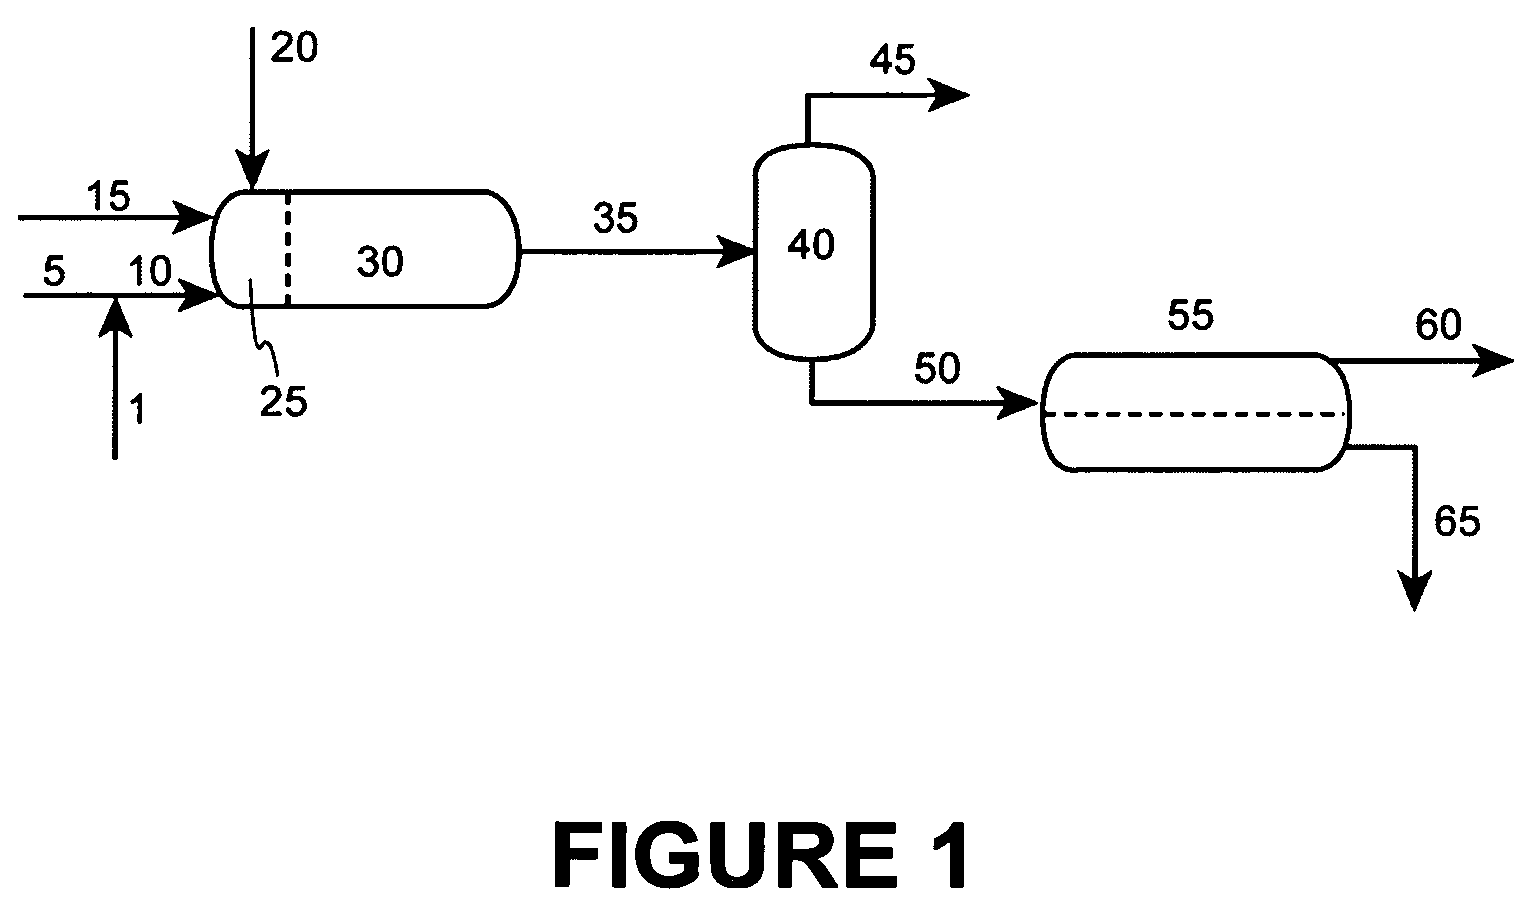 Process for the desulfurization of heavy oils and bitumens